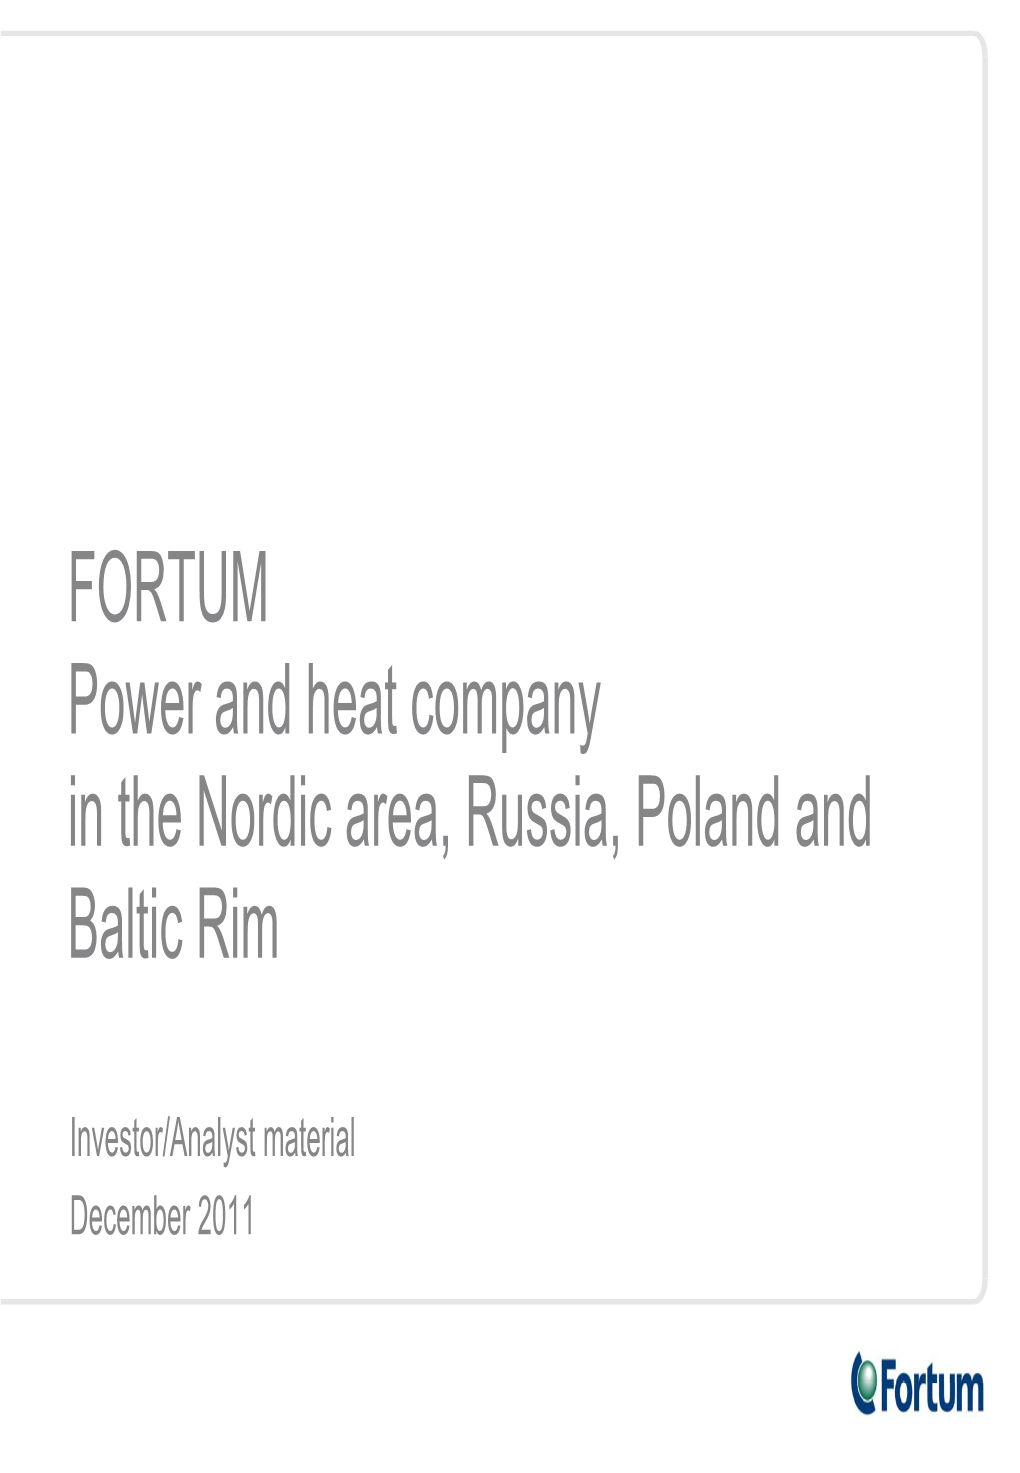 FORTUM Power and Heat Company in the Nordic Area, Russia, Poland and Baltic Rim